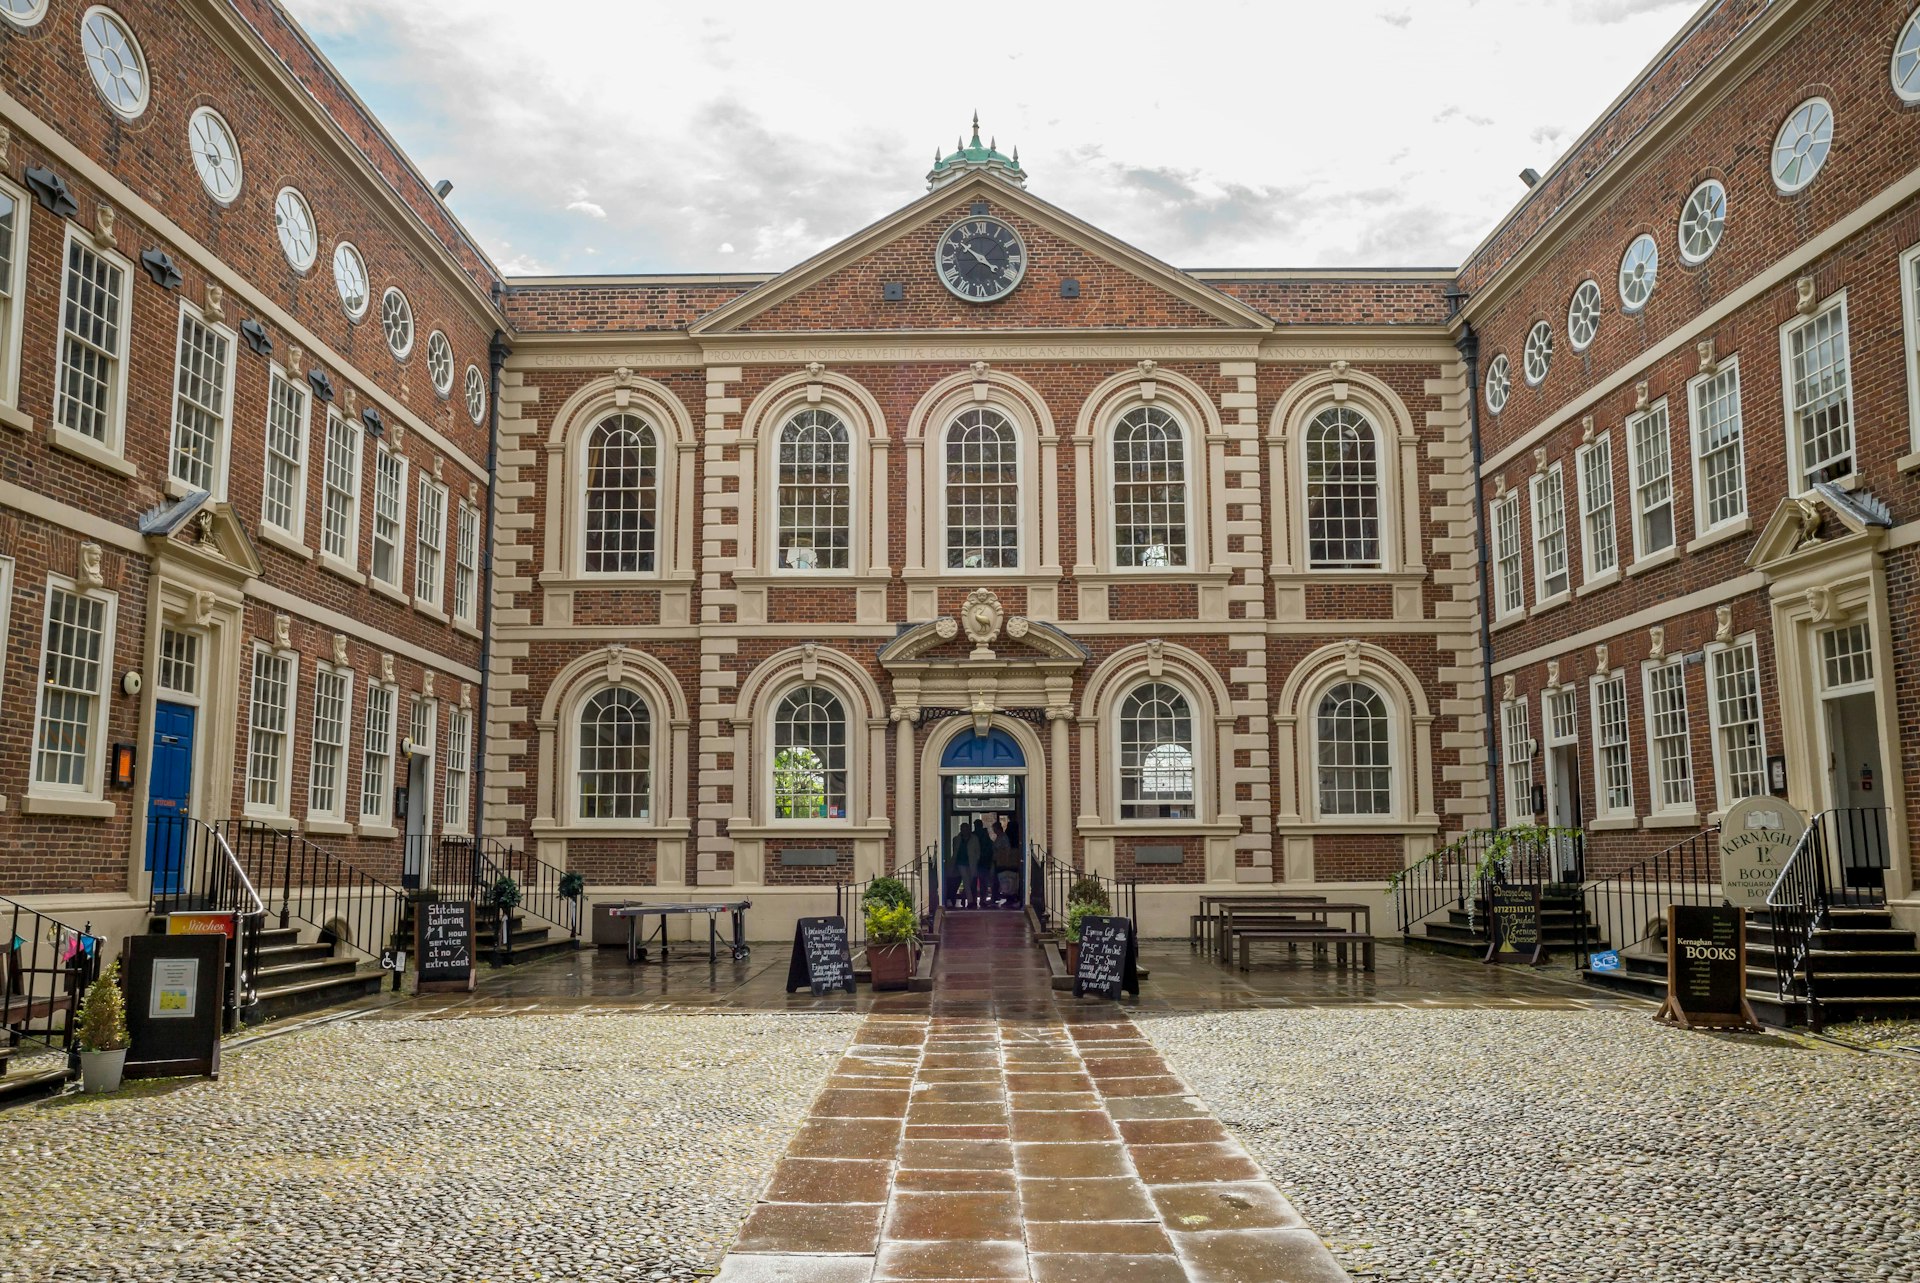 The exterior facade and courtyard of the Bluecoat gallery in Liverpool